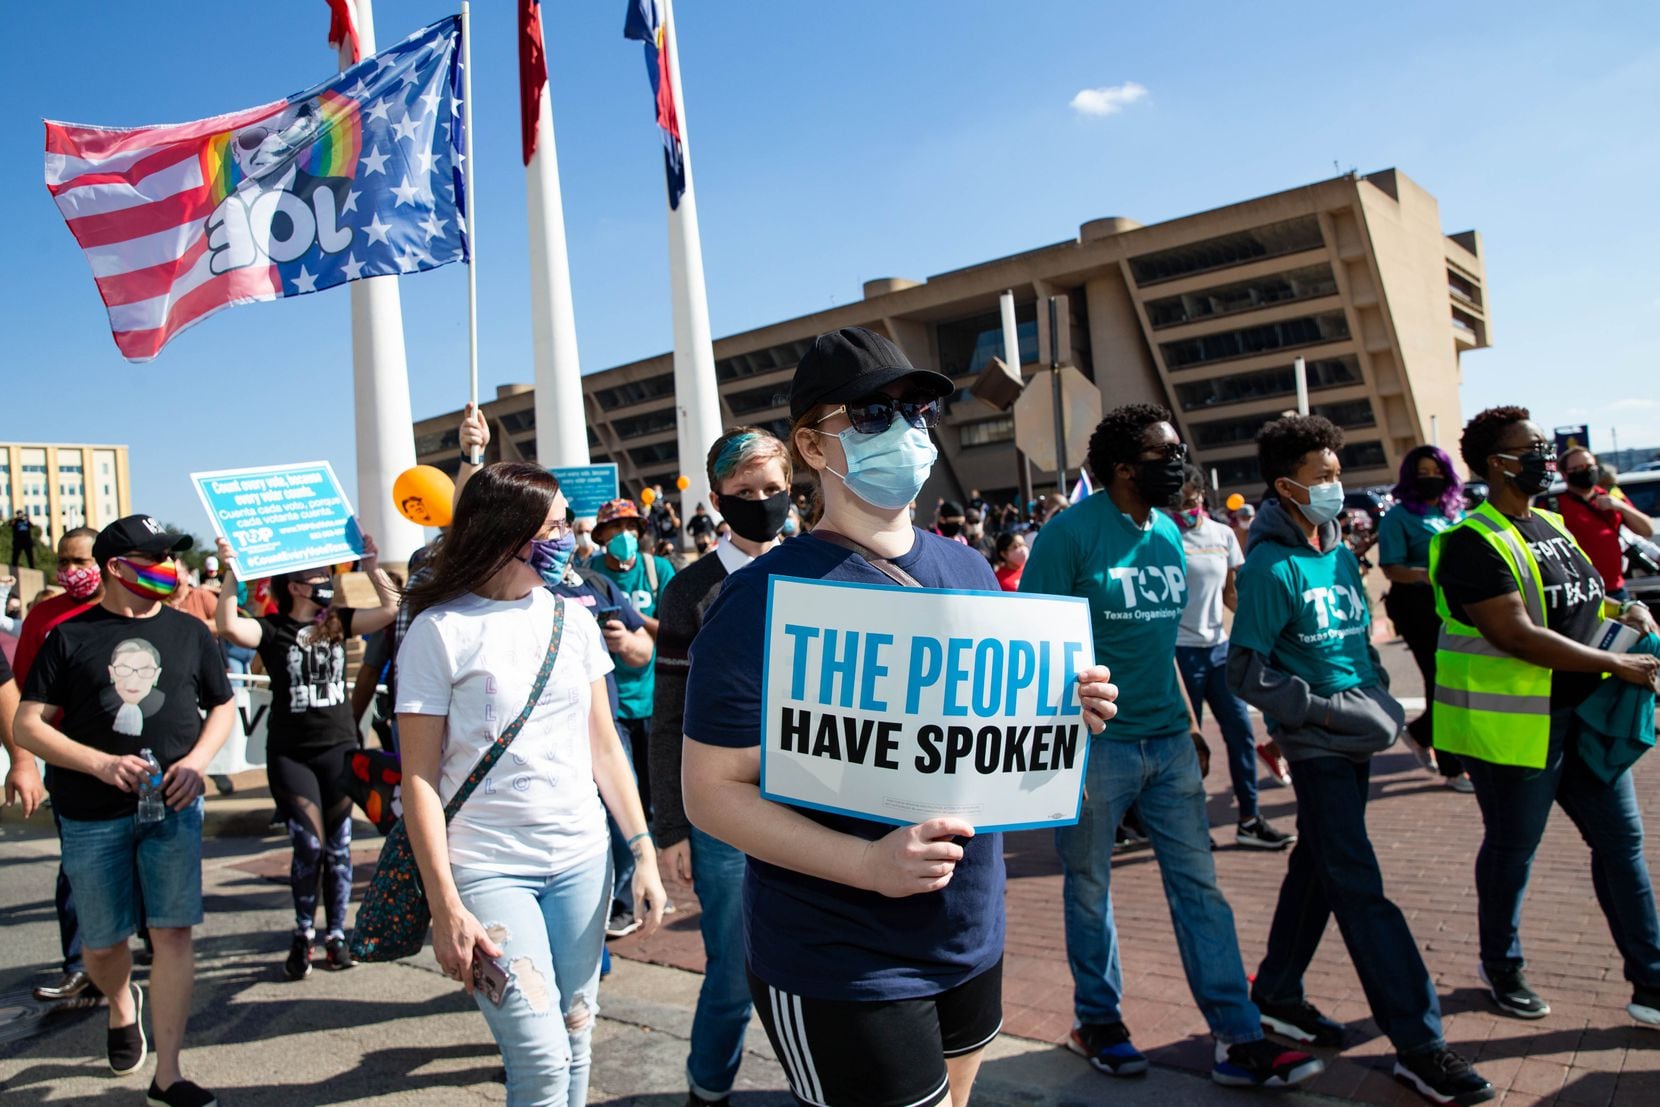 Demonstrators march following a Count Every Vote rally in downtown Dallas on Saturday, Nov. 7, 2020. (Juan Figueroa/ The Dallas Morning News)